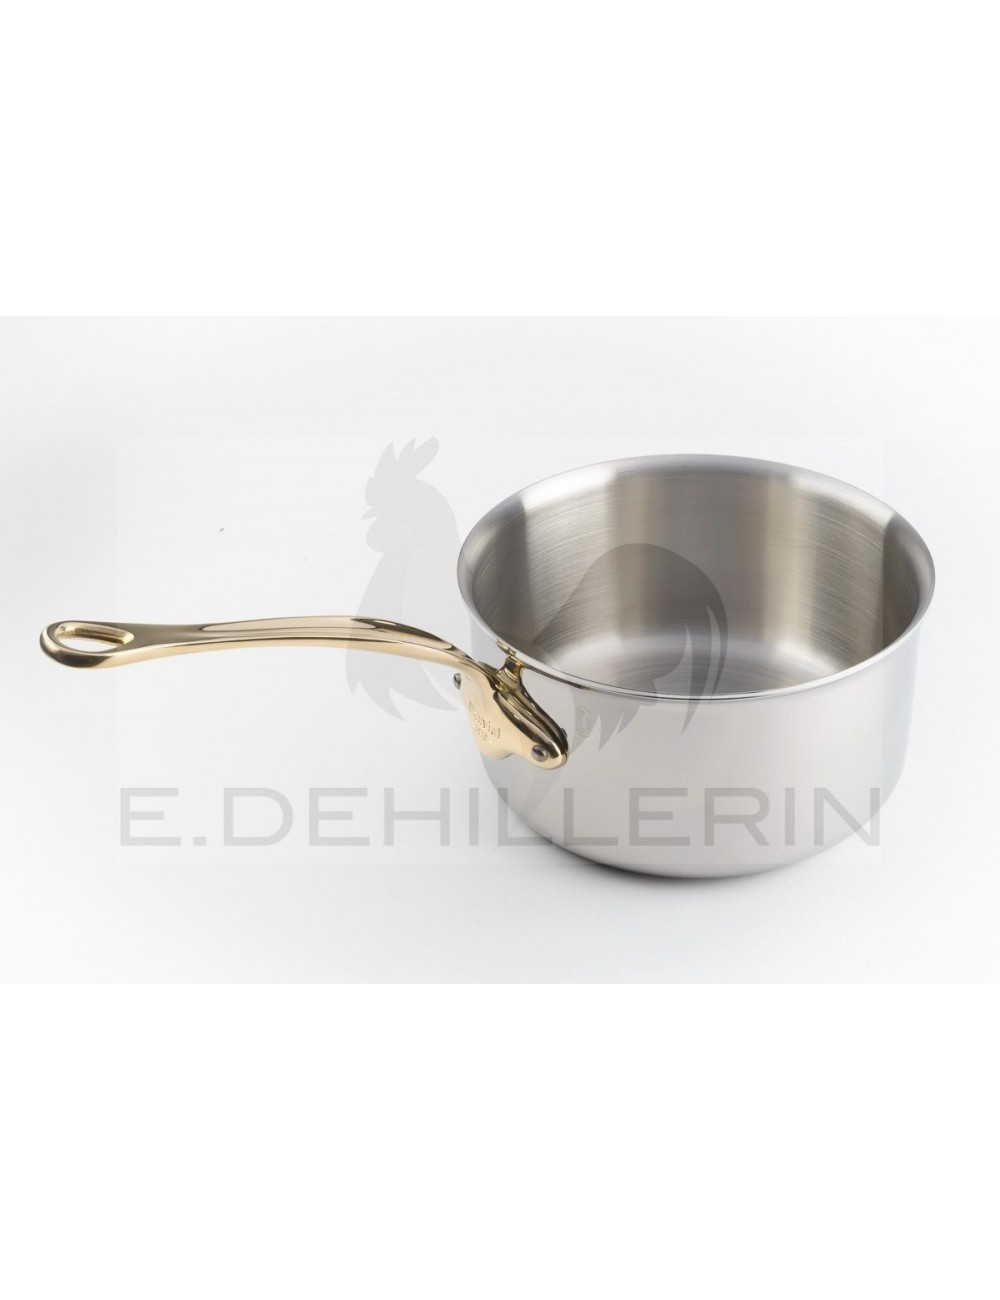 11 Piece Conical Stainless Steel Induction Set